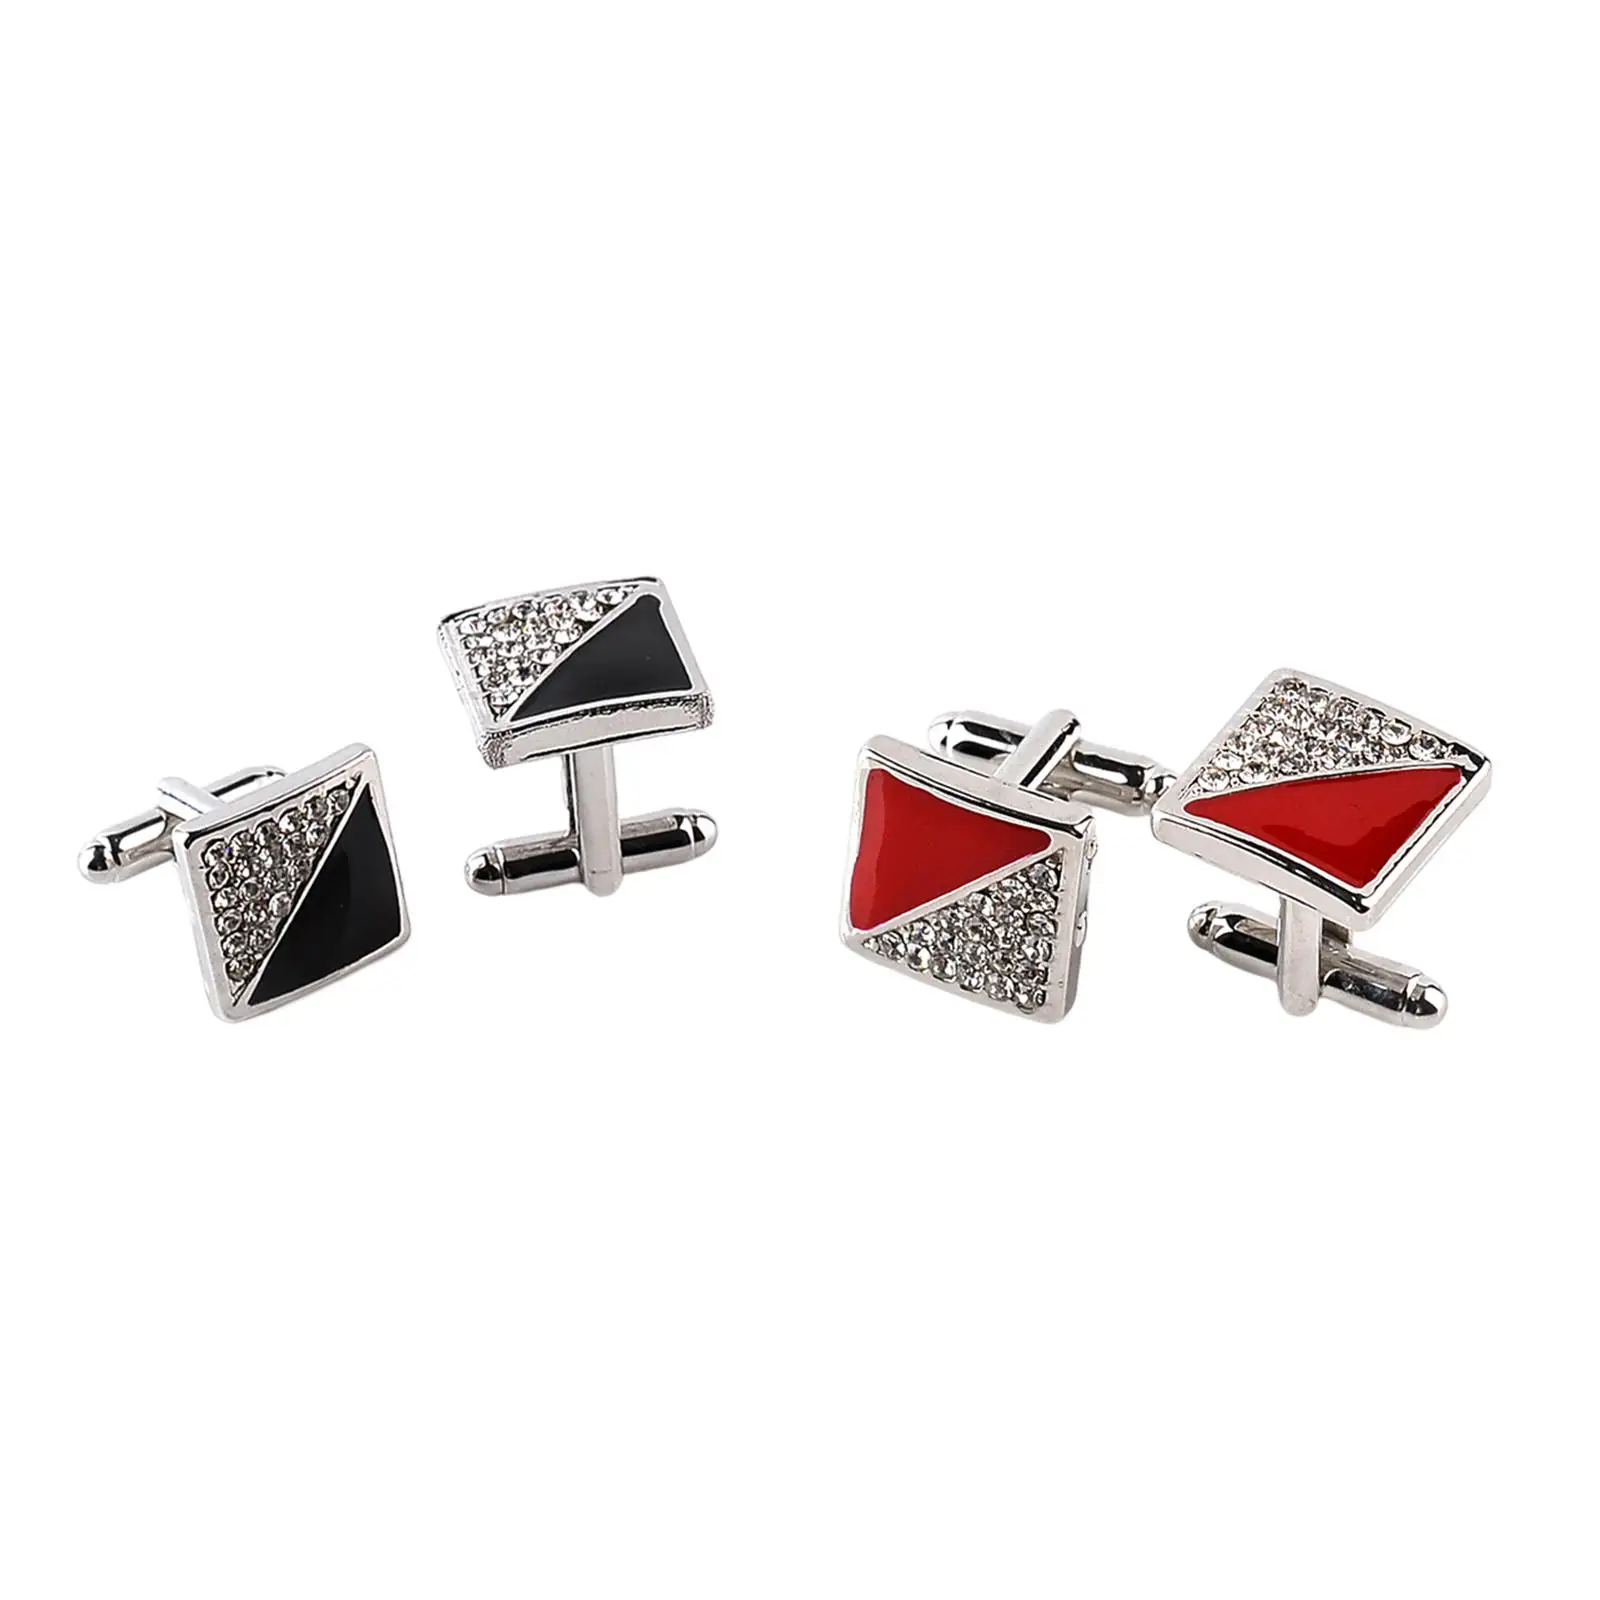 1 Pair Mens Cufflinks Rhinestones Alloy Unique Square Jewelry for Special Occasions Office Proms Favour Gift Suit Accessories